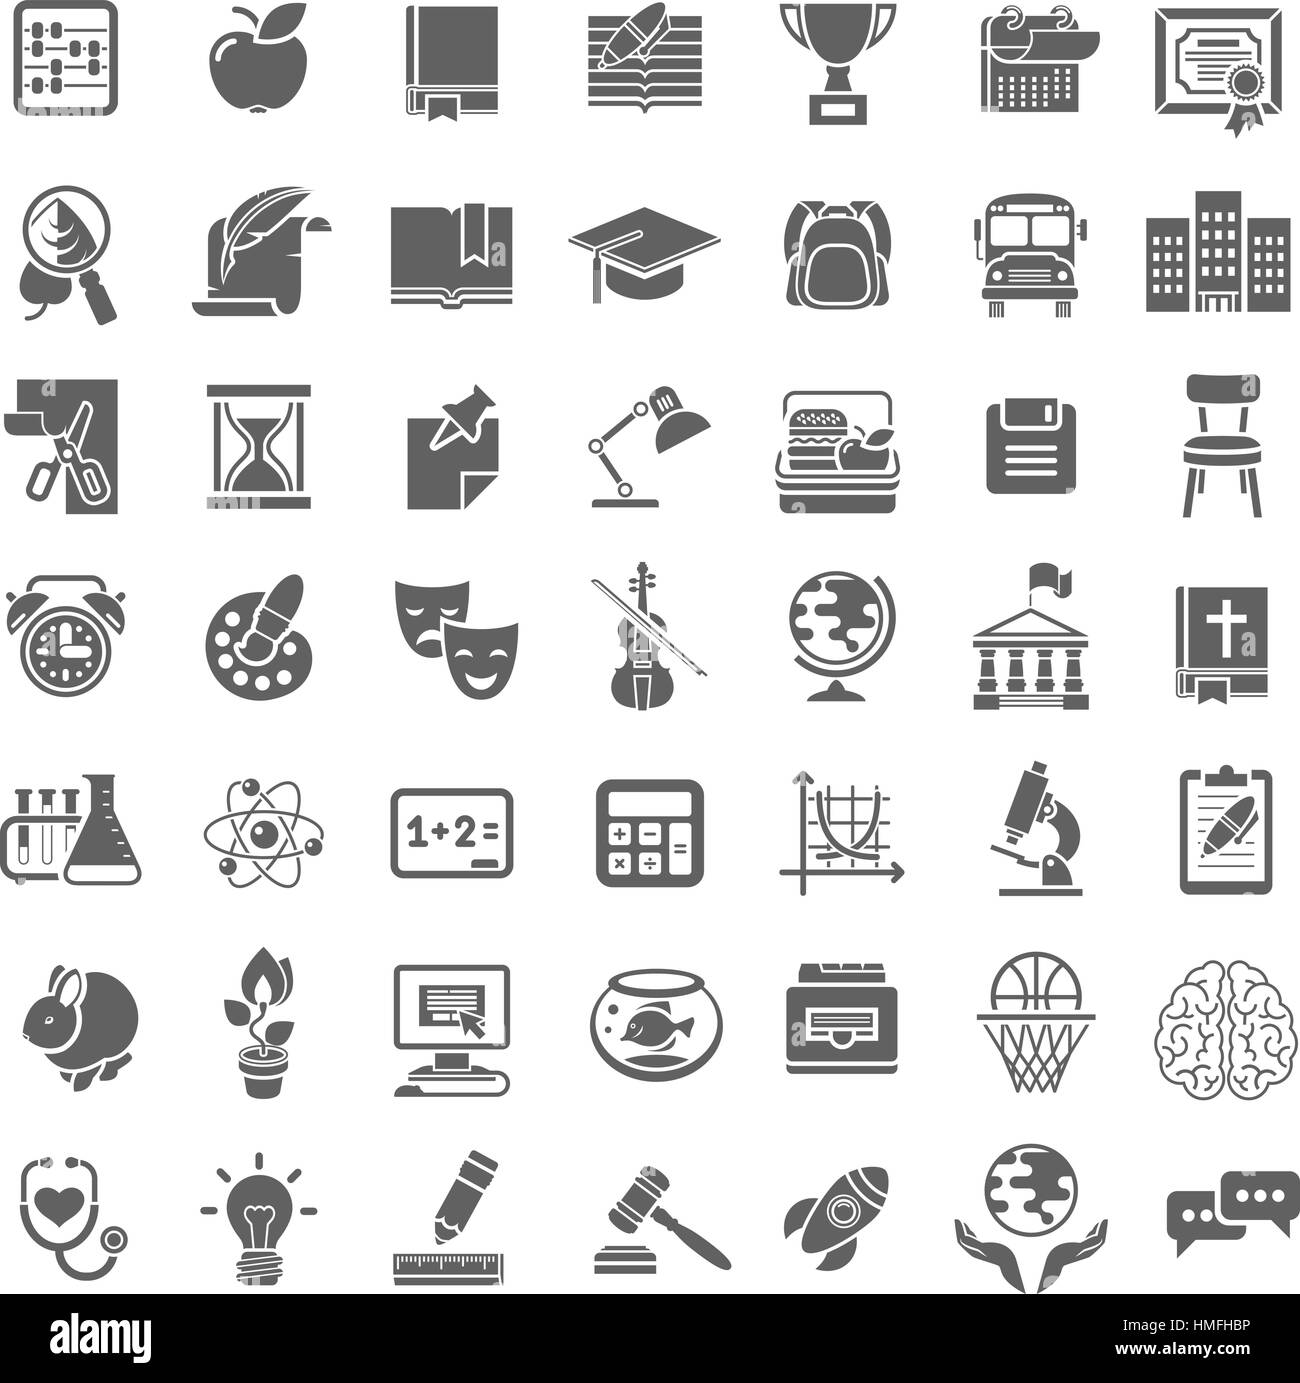 Set of plain monochrome silhouette vector icons of school subjects, education and science symbols Stock Vector